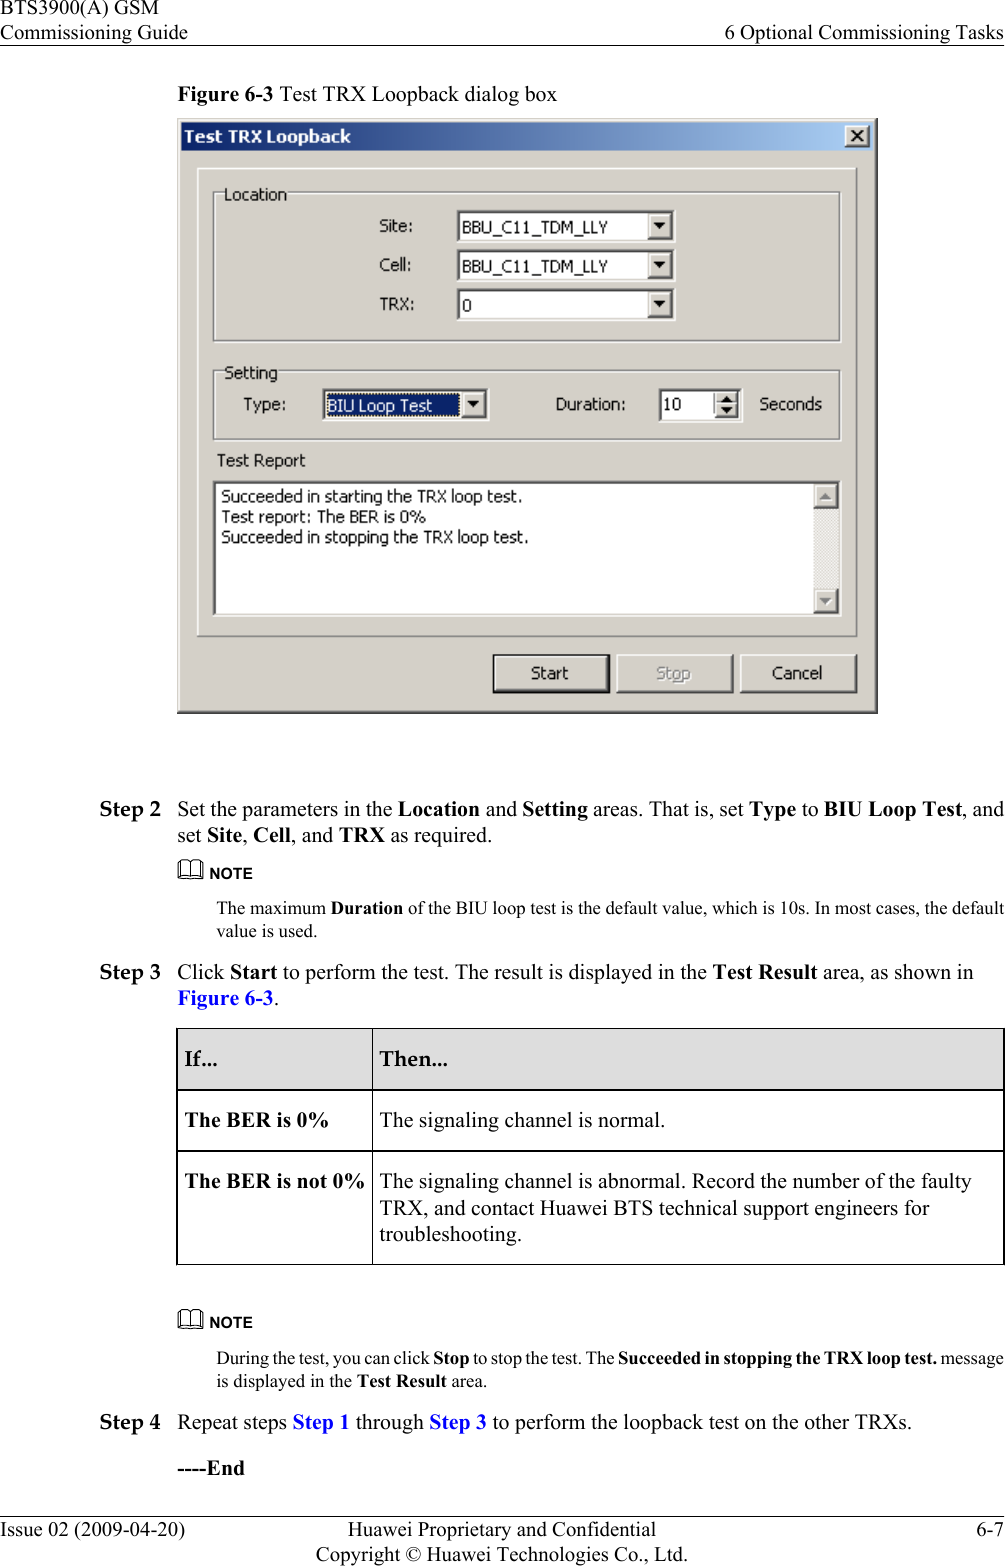 Figure 6-3 Test TRX Loopback dialog box Step 2 Set the parameters in the Location and Setting areas. That is, set Type to BIU Loop Test, andset Site, Cell, and TRX as required.NOTEThe maximum Duration of the BIU loop test is the default value, which is 10s. In most cases, the defaultvalue is used.Step 3 Click Start to perform the test. The result is displayed in the Test Result area, as shown inFigure 6-3.If... Then...The BER is 0% The signaling channel is normal.The BER is not 0% The signaling channel is abnormal. Record the number of the faultyTRX, and contact Huawei BTS technical support engineers fortroubleshooting.NOTEDuring the test, you can click Stop to stop the test. The Succeeded in stopping the TRX loop test. messageis displayed in the Test Result area.Step 4 Repeat steps Step 1 through Step 3 to perform the loopback test on the other TRXs.----EndBTS3900(A) GSMCommissioning Guide 6 Optional Commissioning TasksIssue 02 (2009-04-20) Huawei Proprietary and ConfidentialCopyright © Huawei Technologies Co., Ltd.6-7